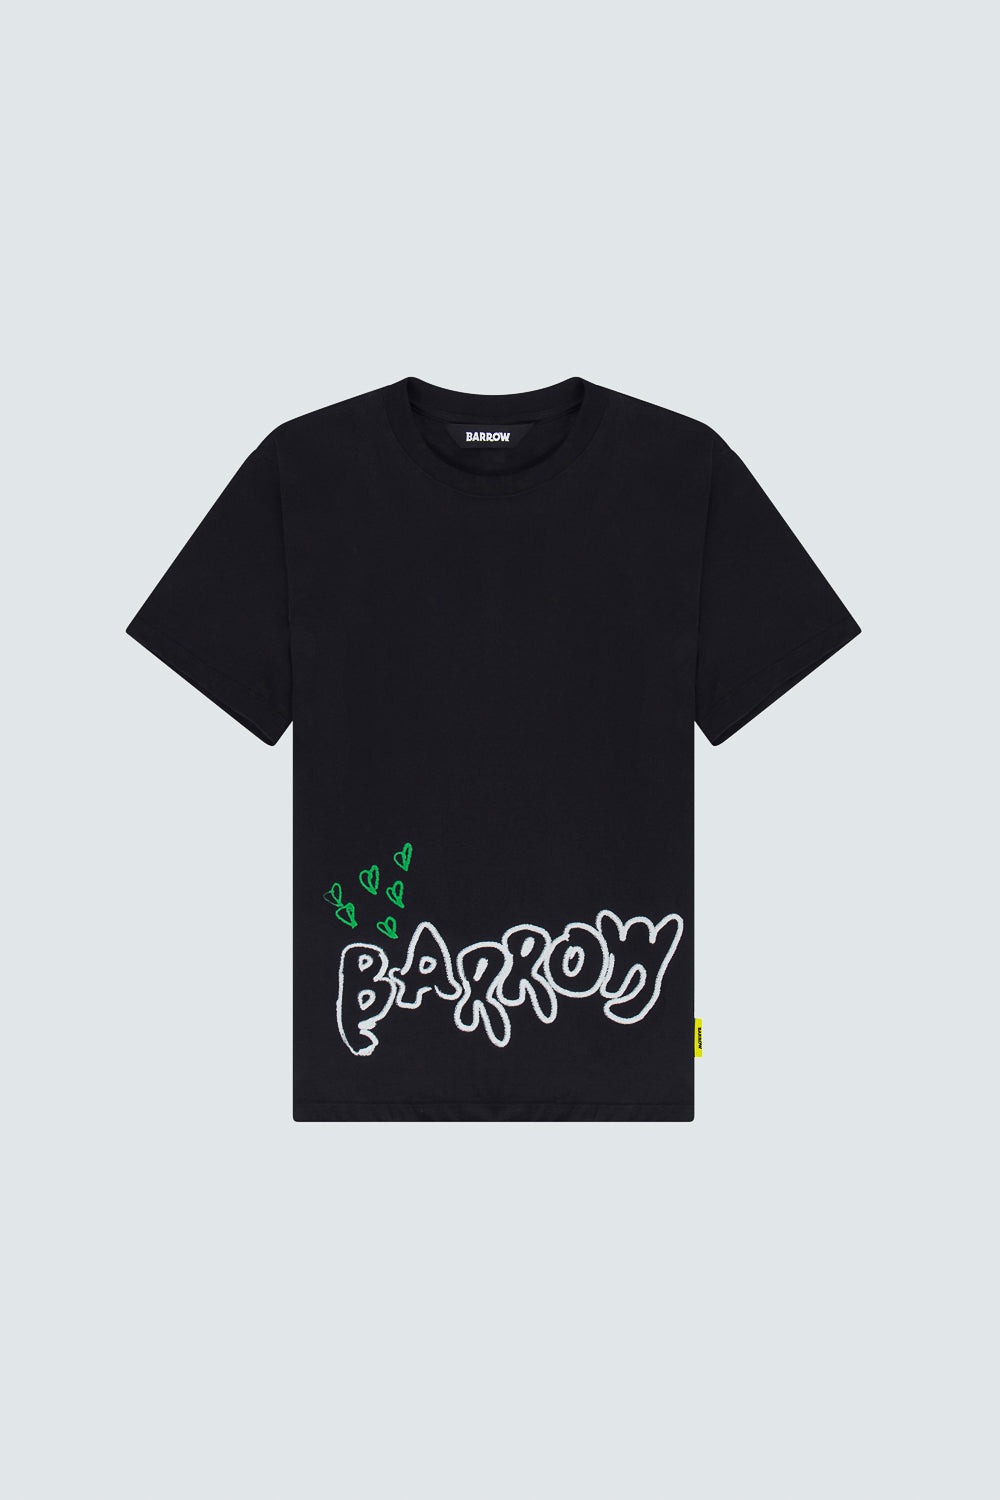 Buy the Barrow Back Design T-Shirt in Black at Intro. Spend £50 for free UK delivery. Official stockists. We ship worldwide.